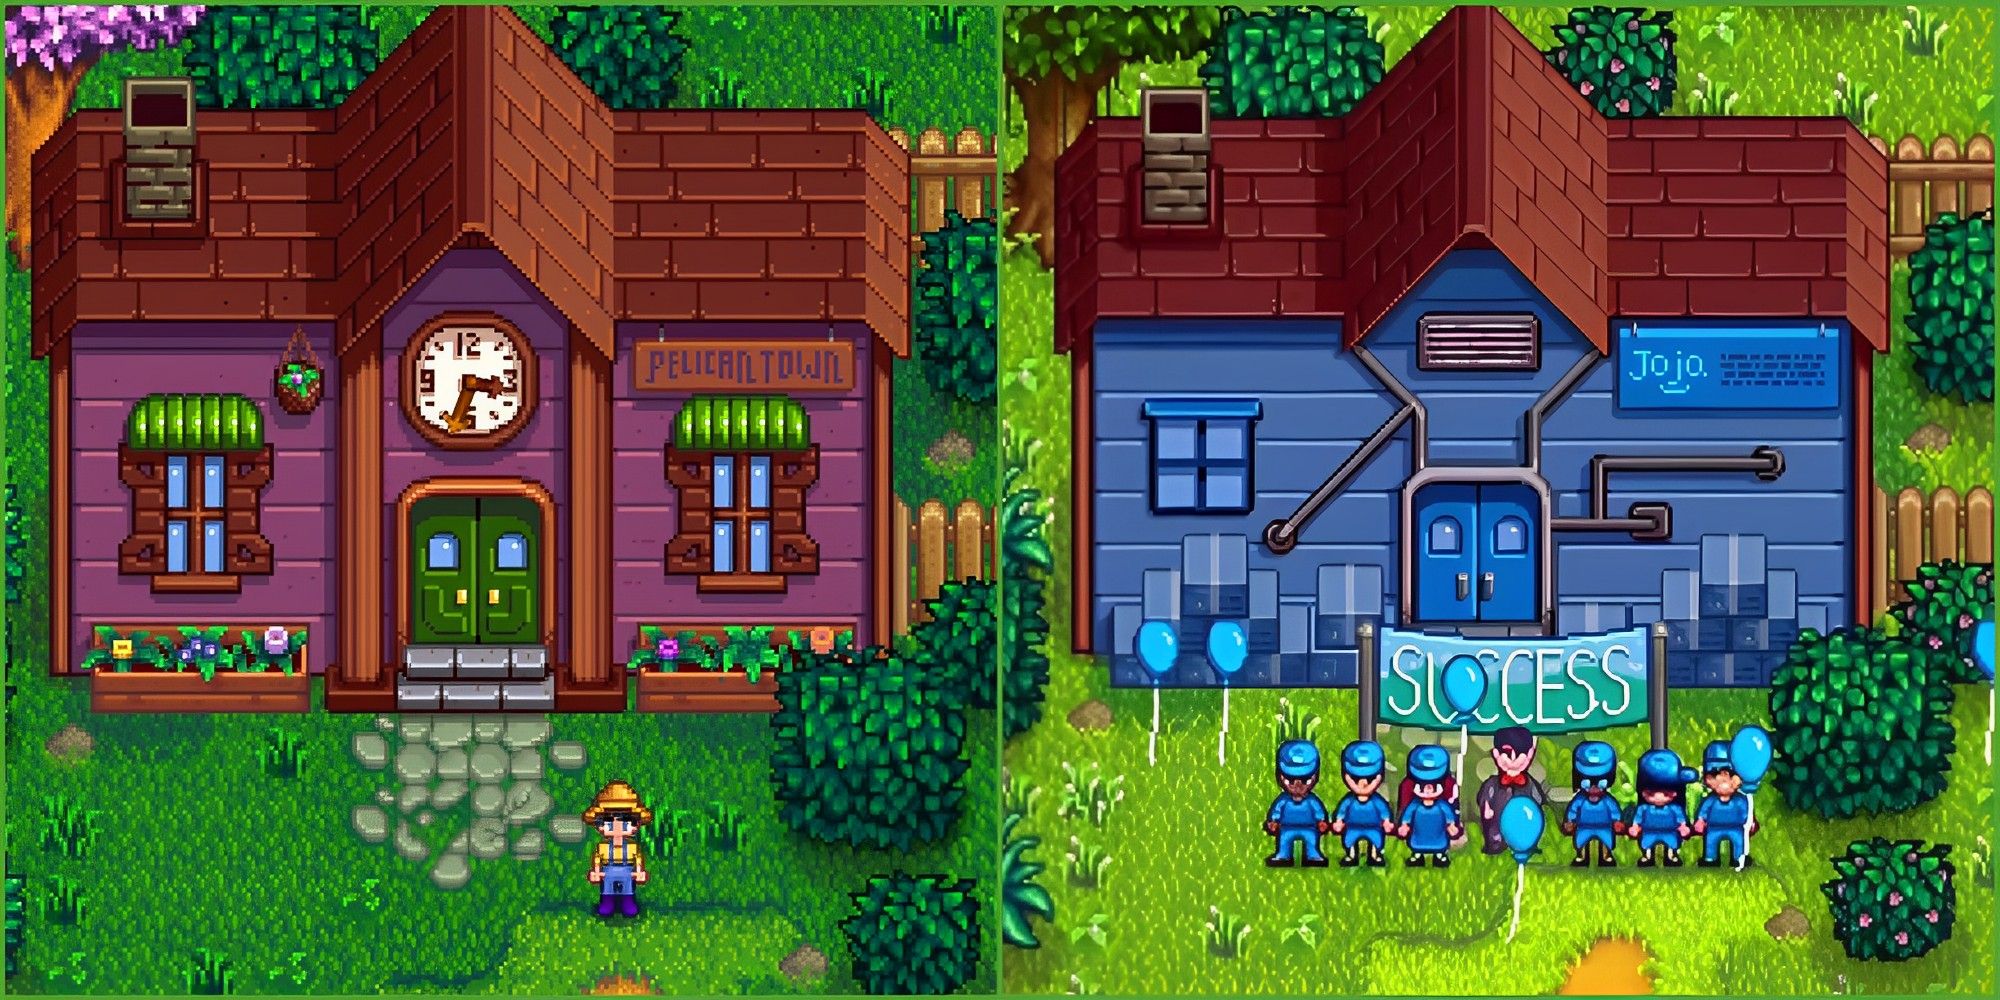 Completed versions of the Community Center and Joja Warehouse side by side